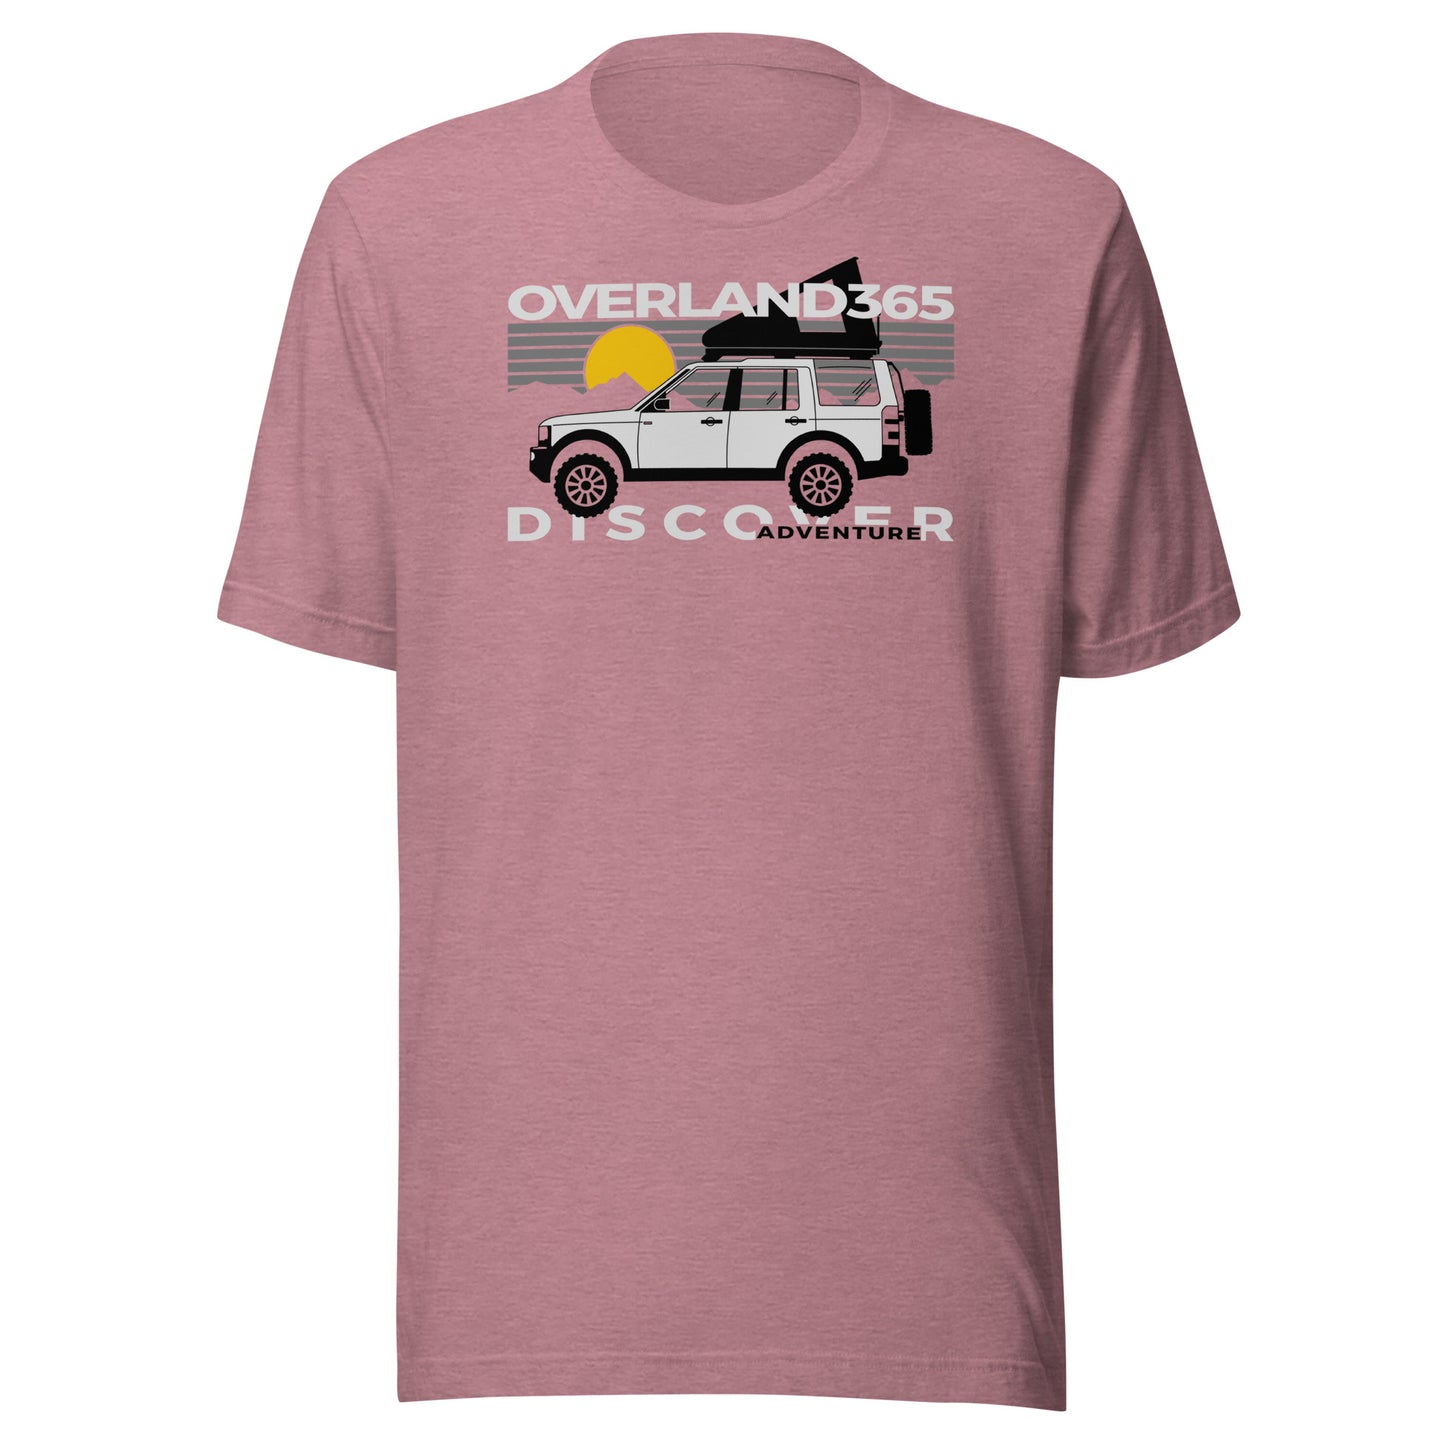 Discover Adventure. Land Rover Discovery inspired design. T-shirt. Pink. overland365.com